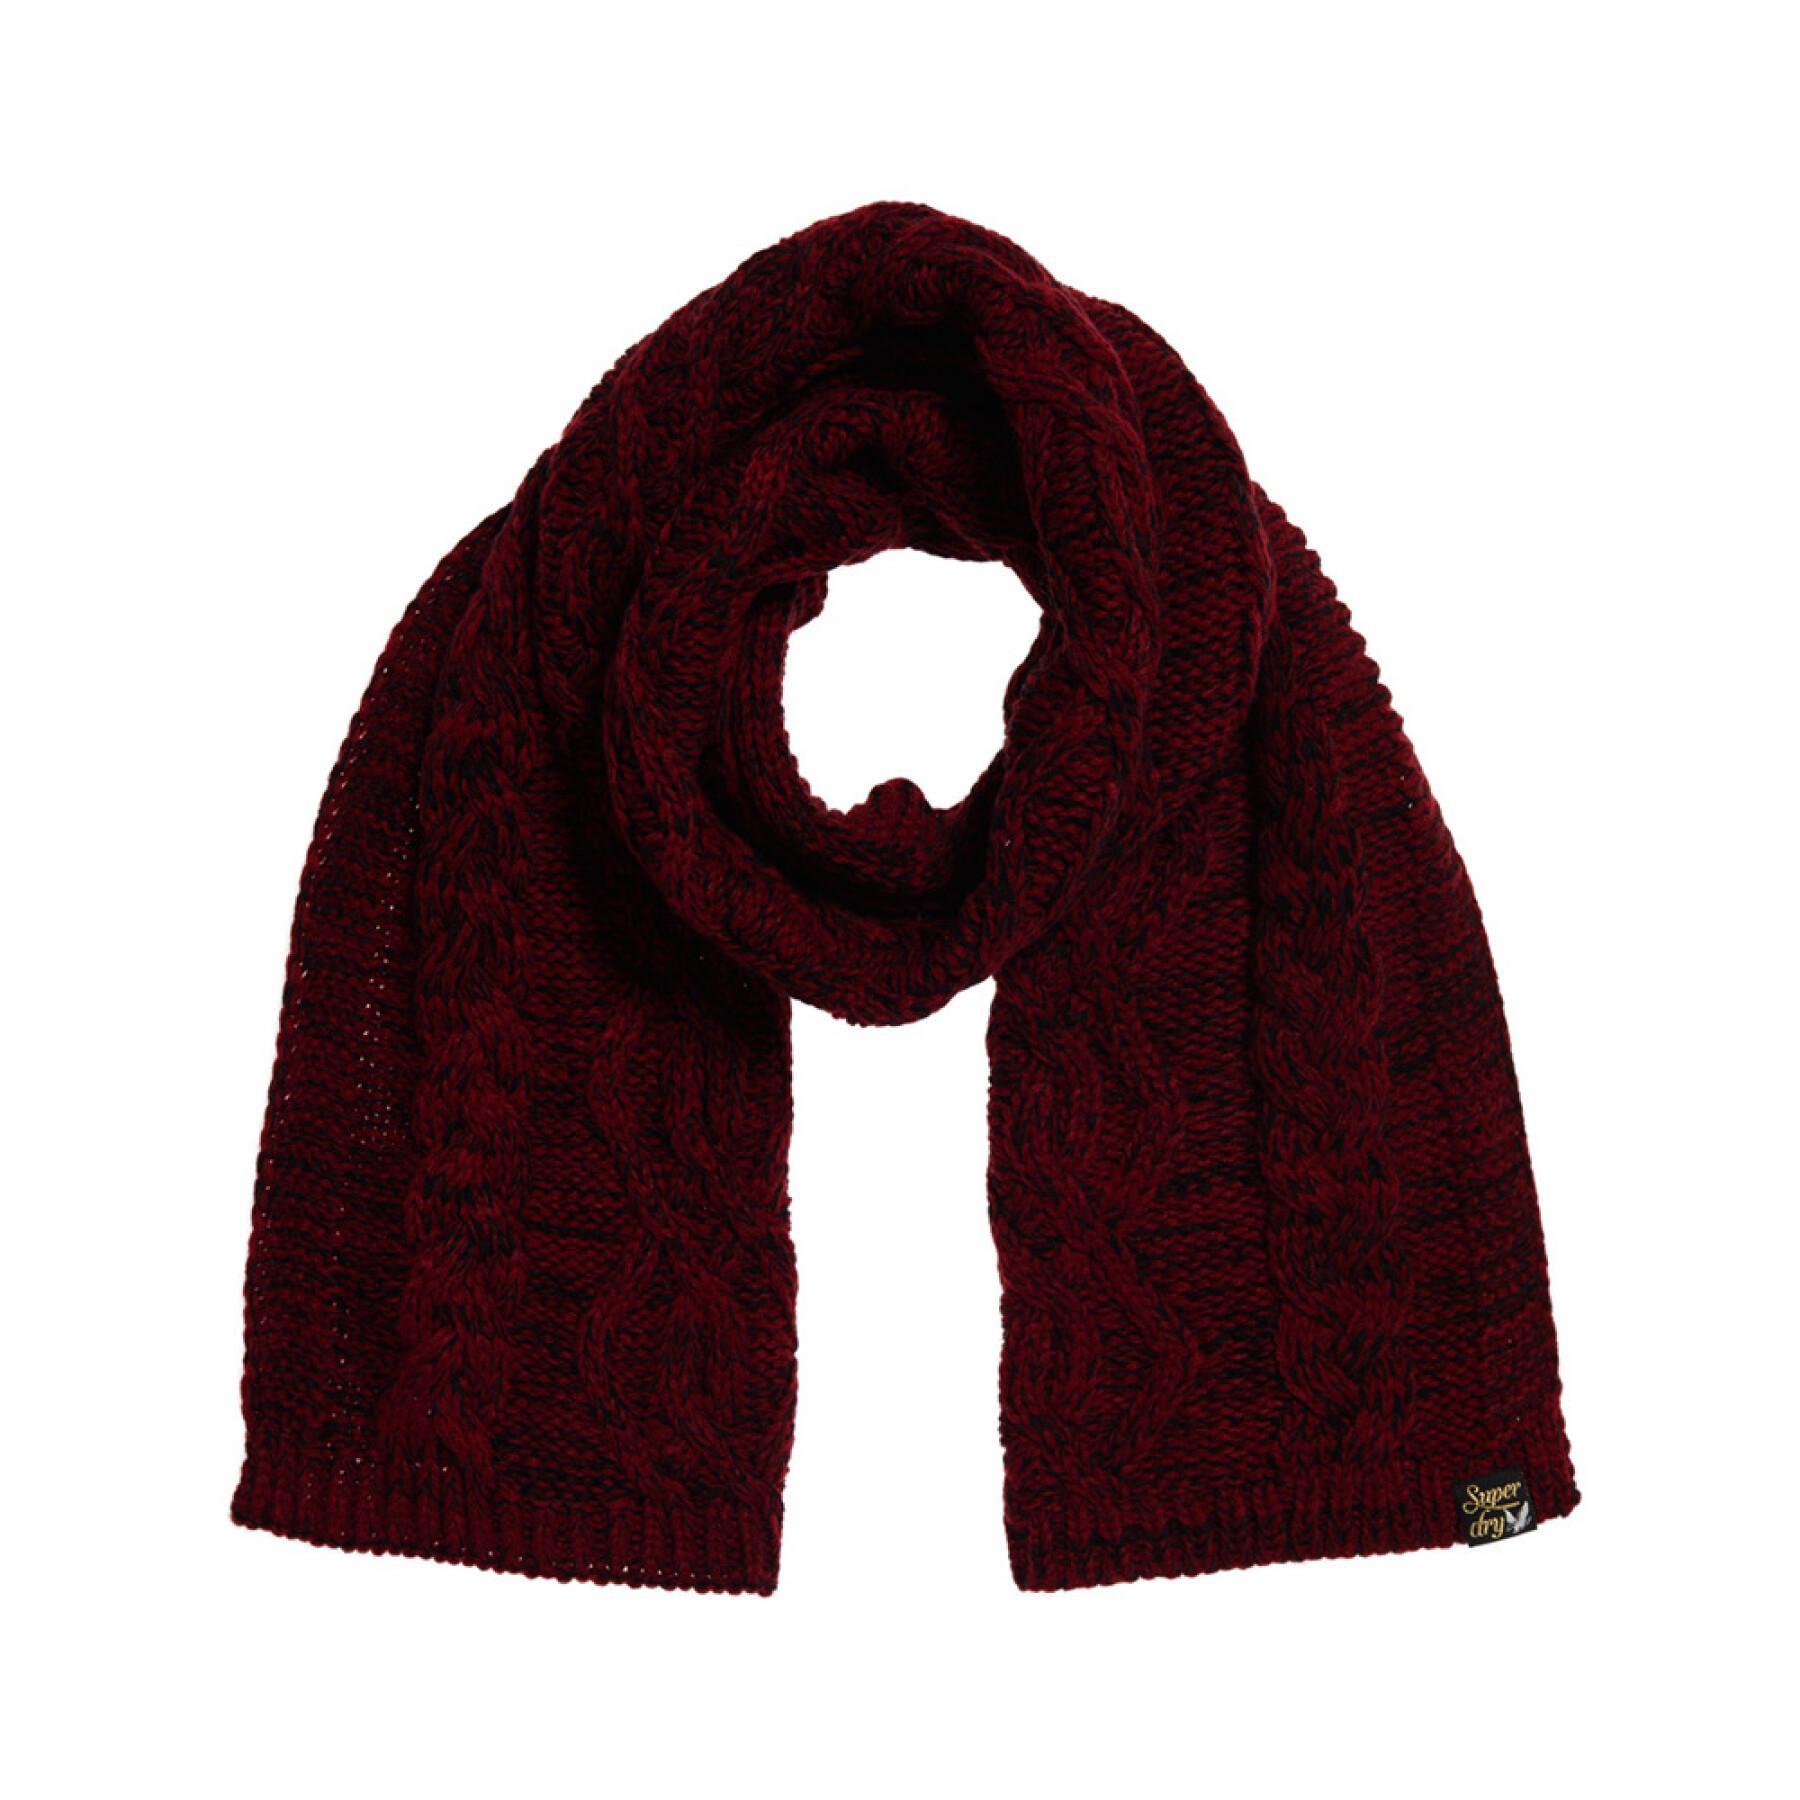 Women's knitted scarf Superdry Arizona